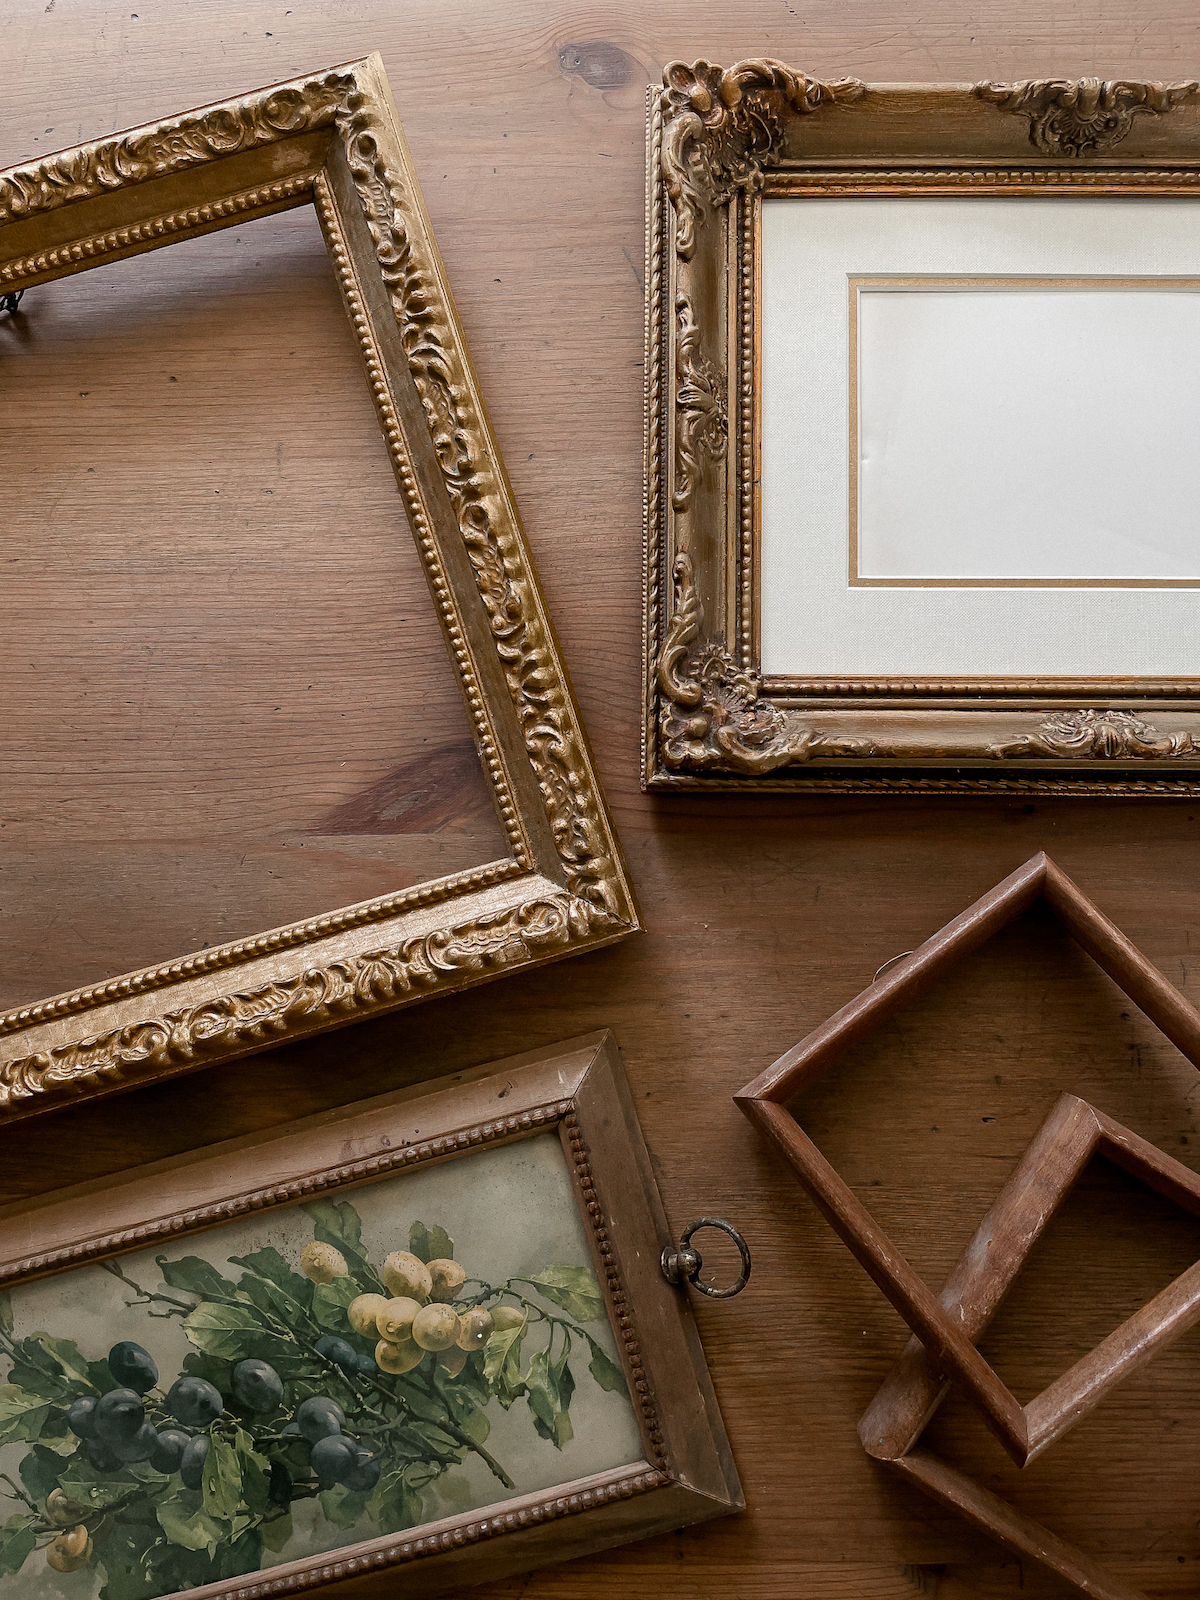 Antique Frames : What to Look For, Where to Shop, Plus a Roundup